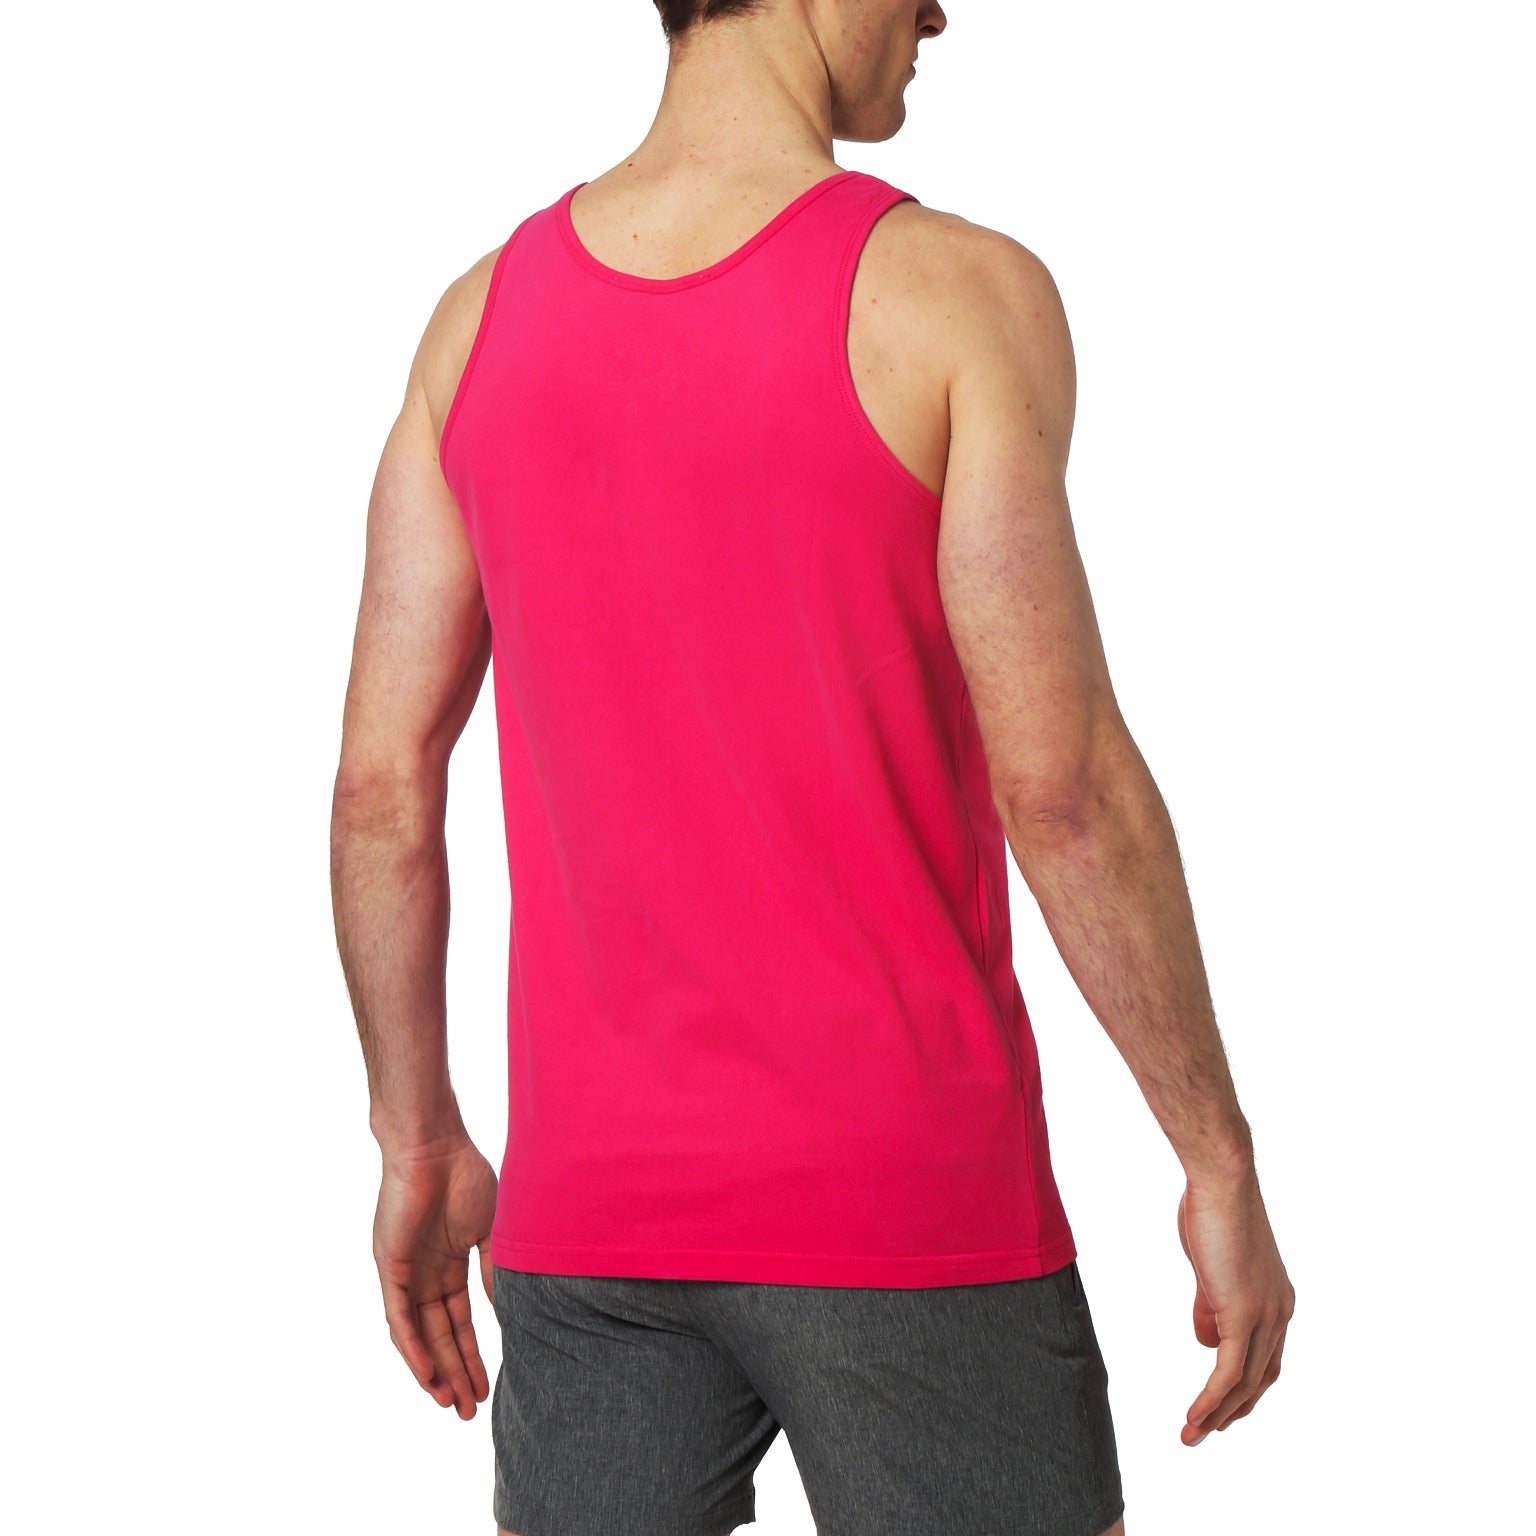 SAVE 50%- ACTIONWEAR- Fuchsia Solid Essential Cotton Tank Top